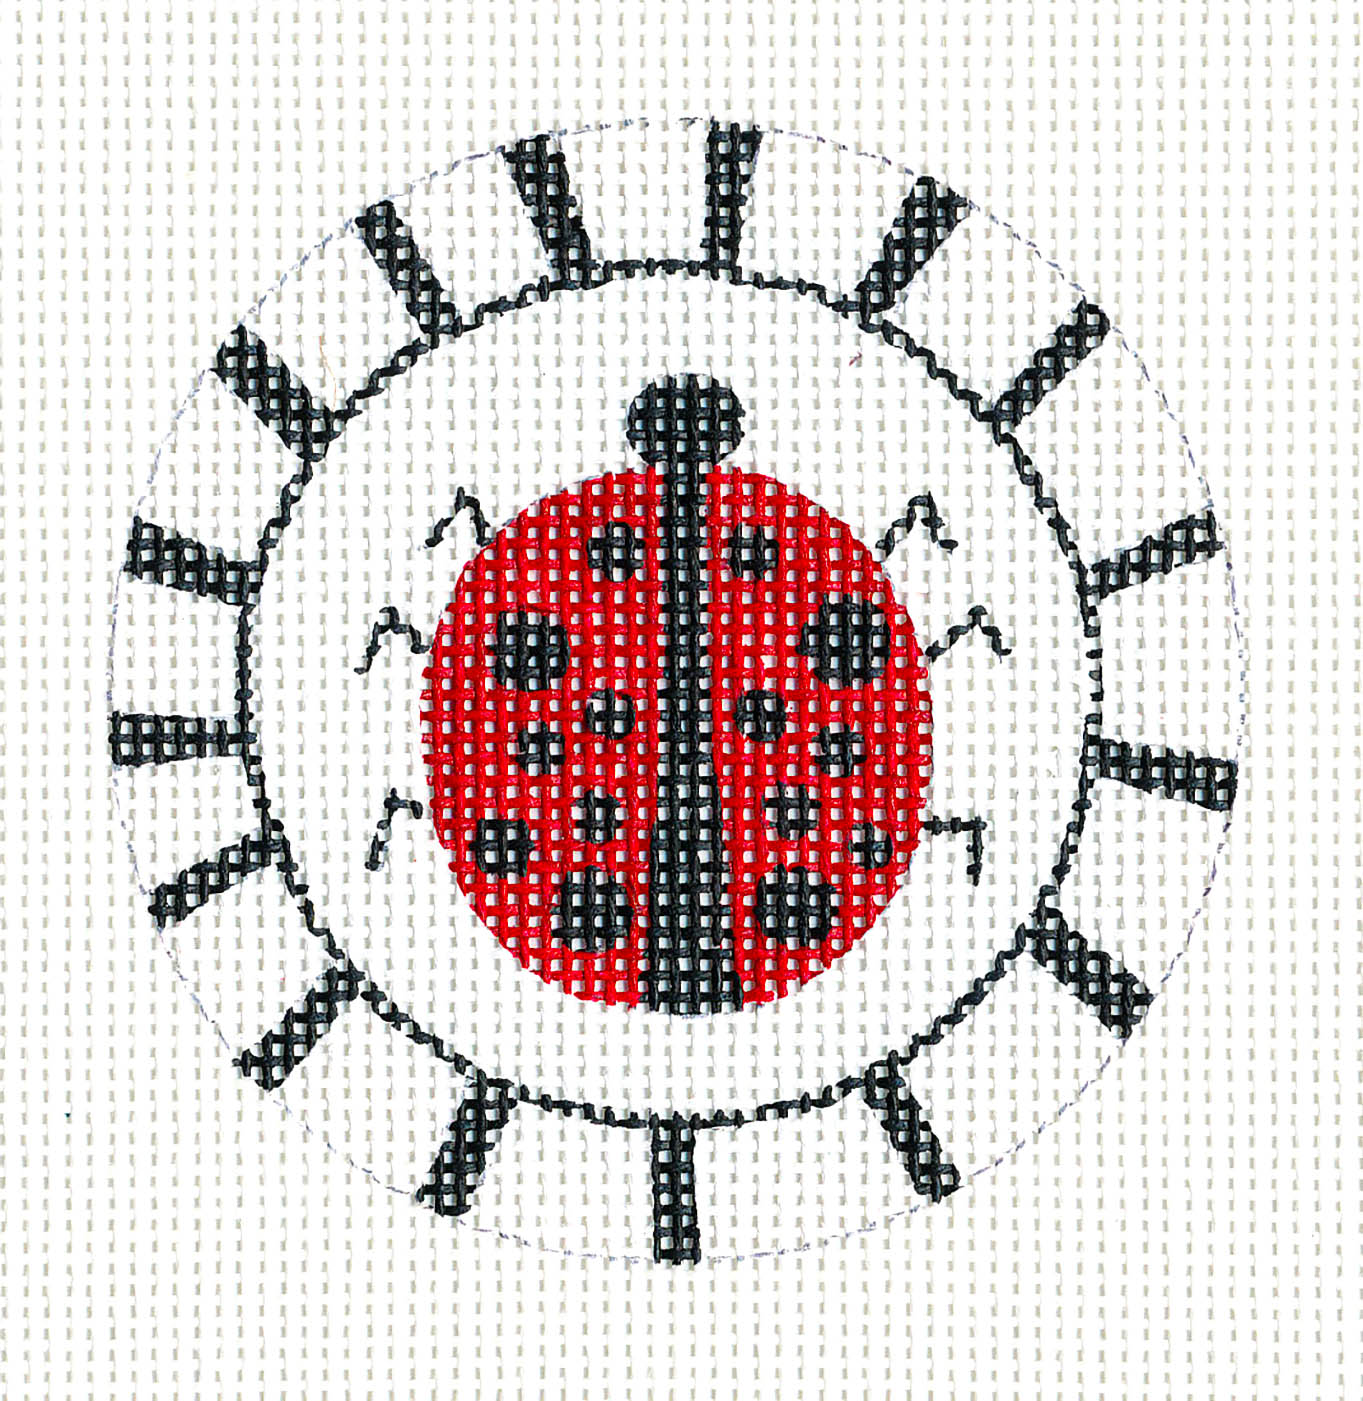 Ladybug with Border 18 mesh handpainted 3" Rd. Needlepoint Canvas Insert or Ornament by ZECCA